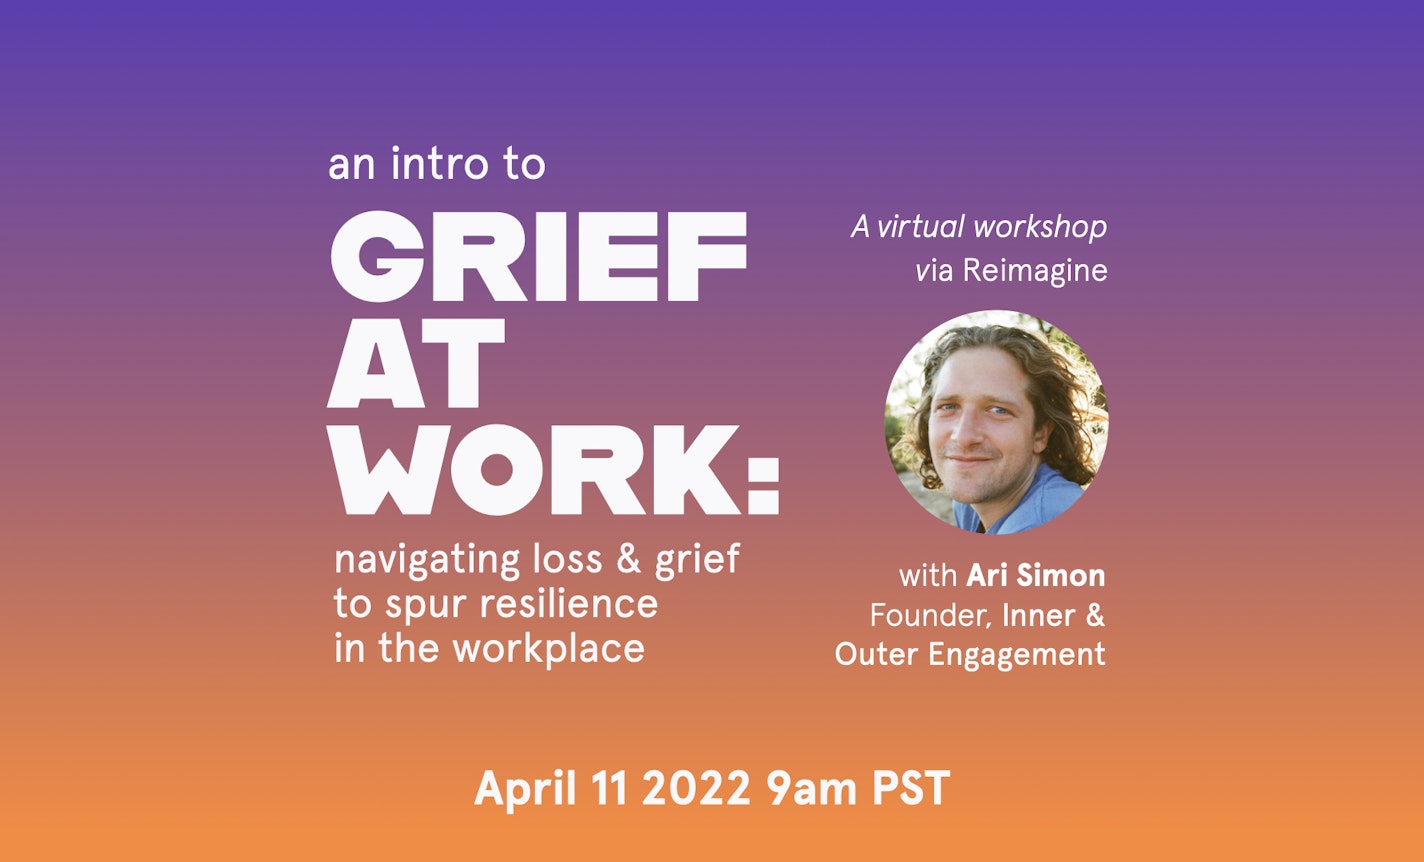 Grief at Work: Welcoming Loss & Resilience in the Workplace